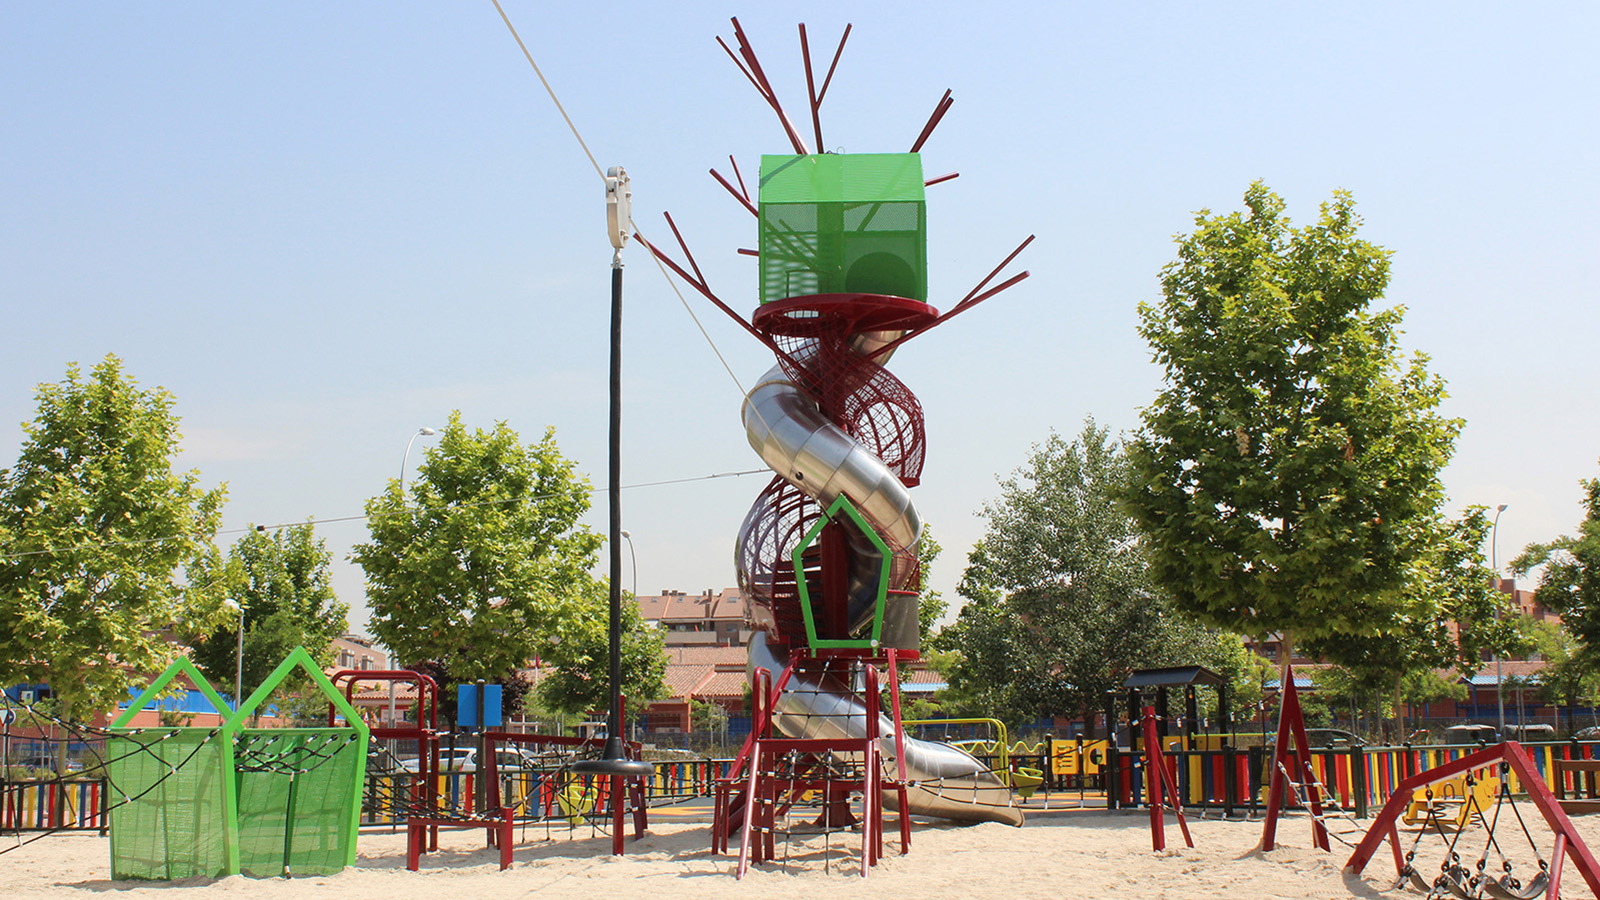 A Treehouse inspired playground in Madrid